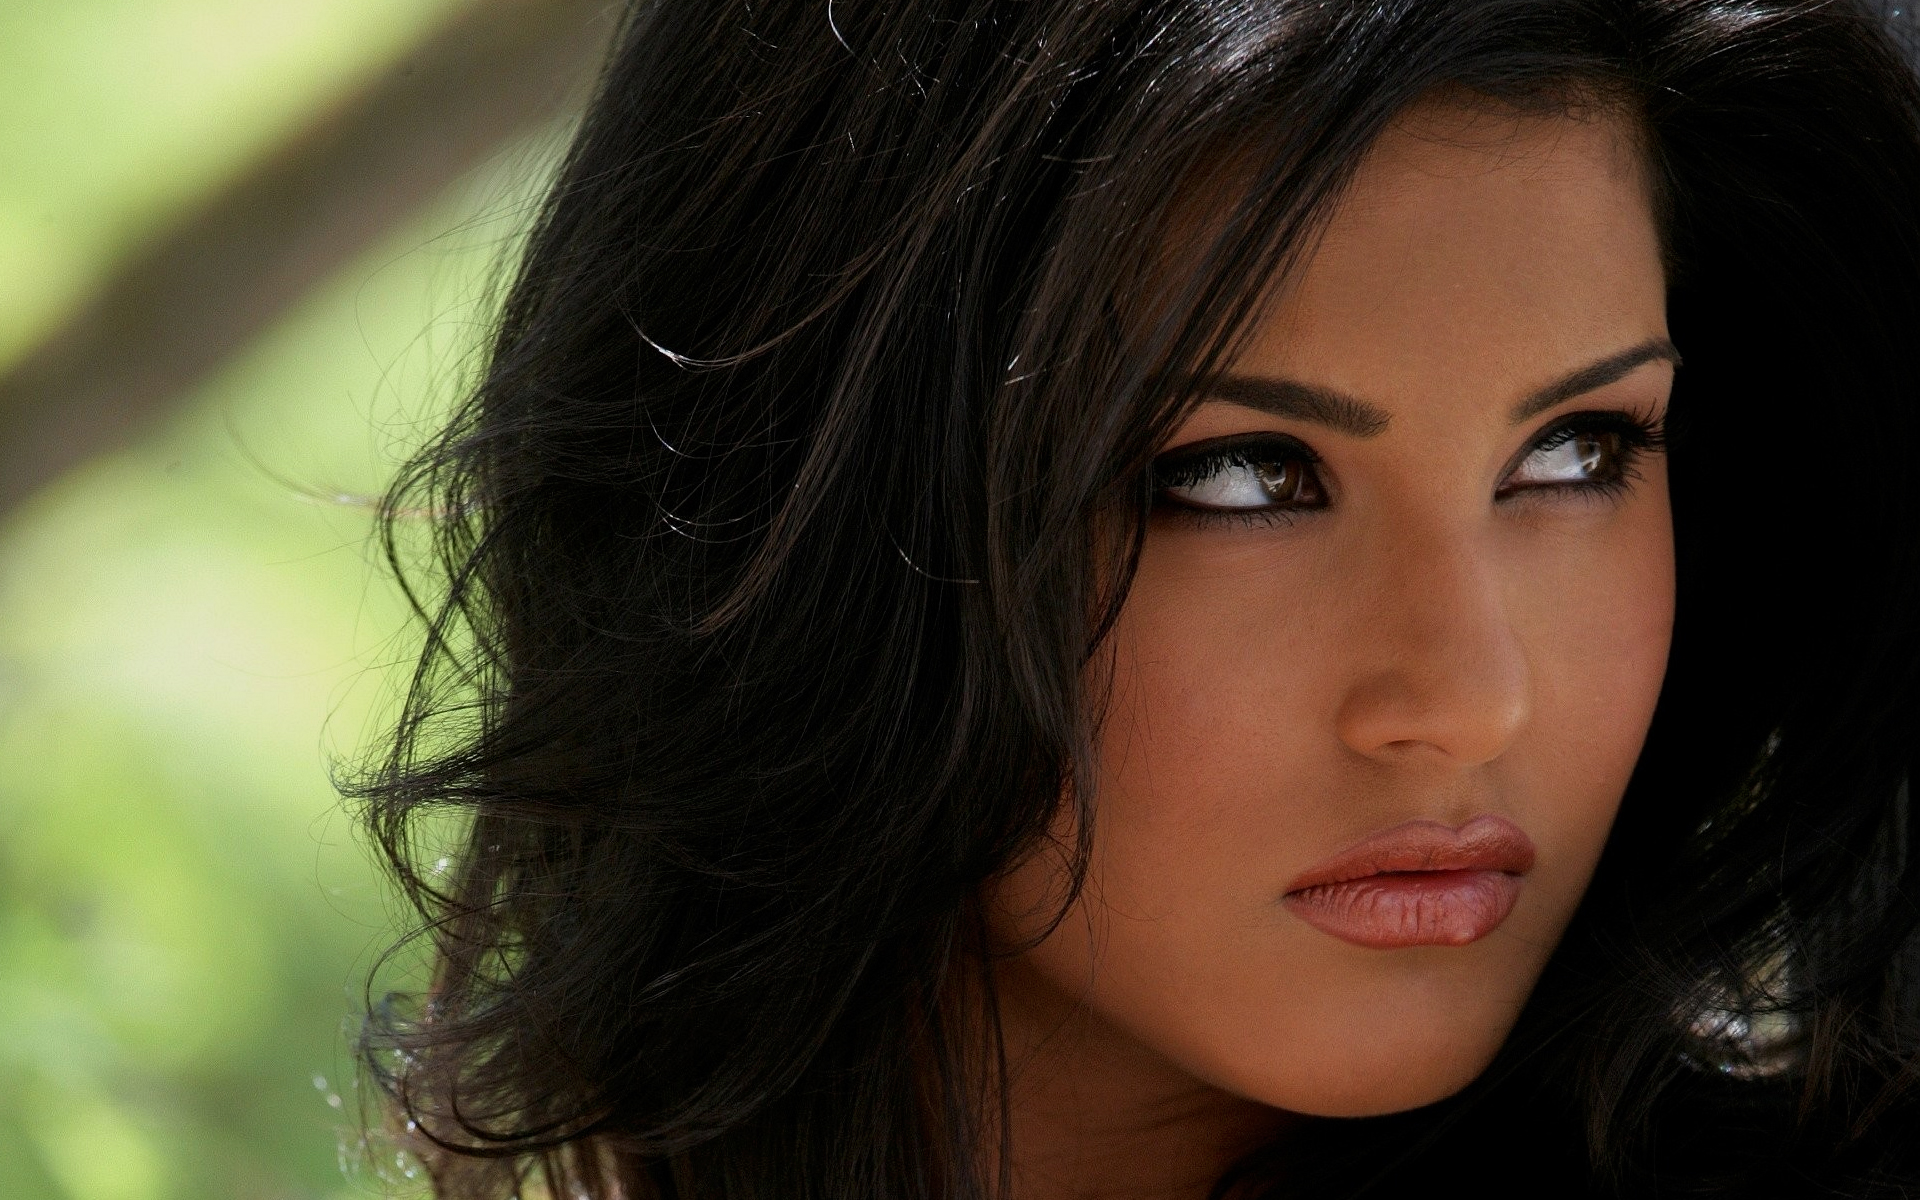 Sunny Leone Wallpapers, Pictures, Images